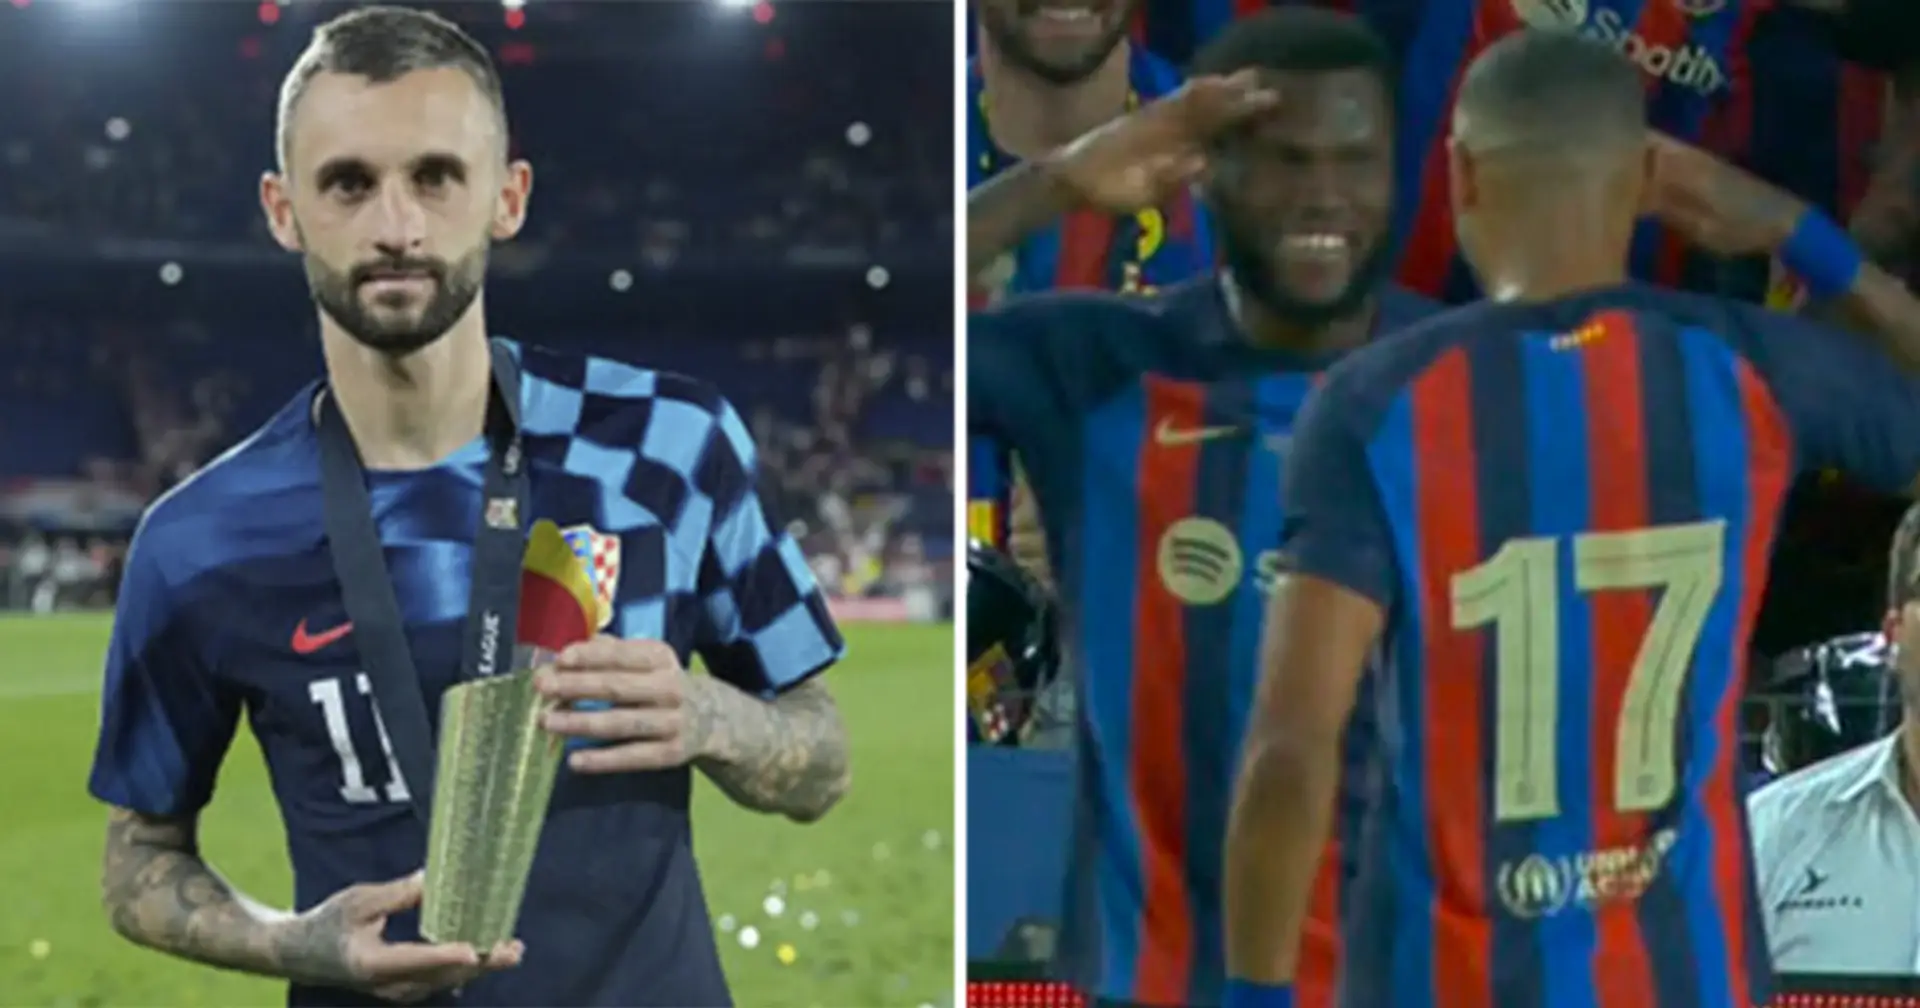 Brozovic agrees to join Barca and 3 more big stories you might've missed